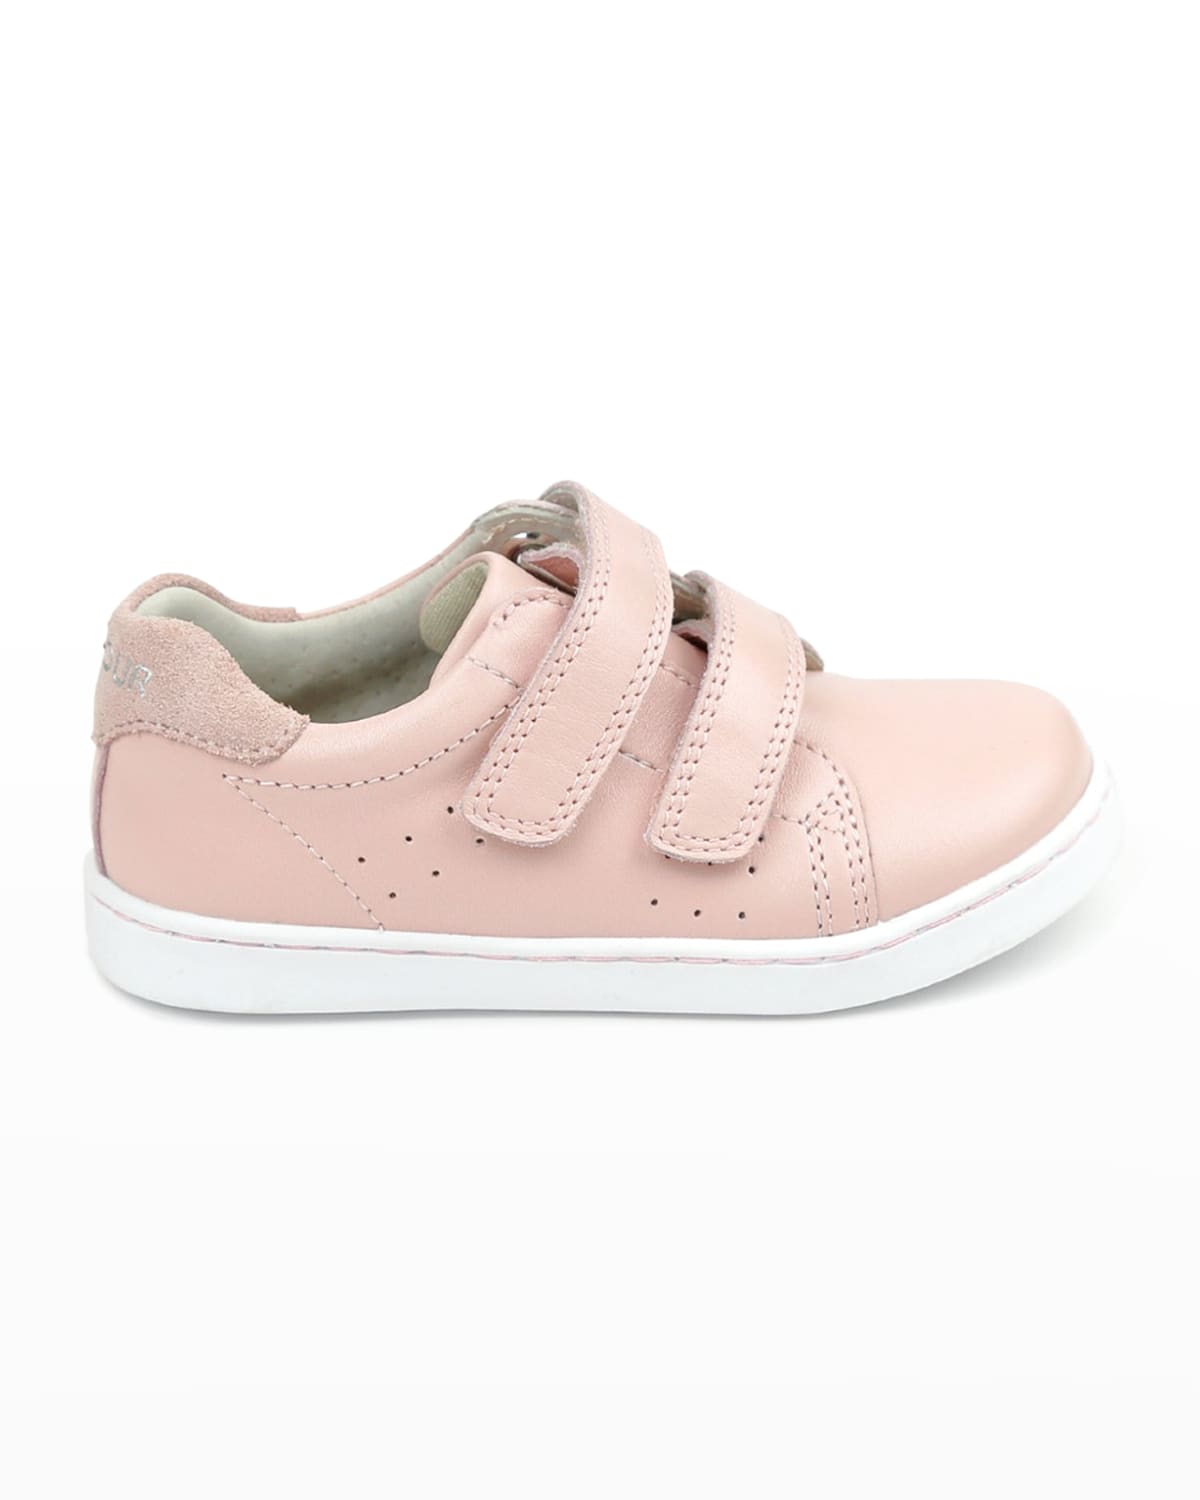 L'amour Shoes Girl's Kenzie Leather Sneakers, Baby/toddlers/kids In Pink